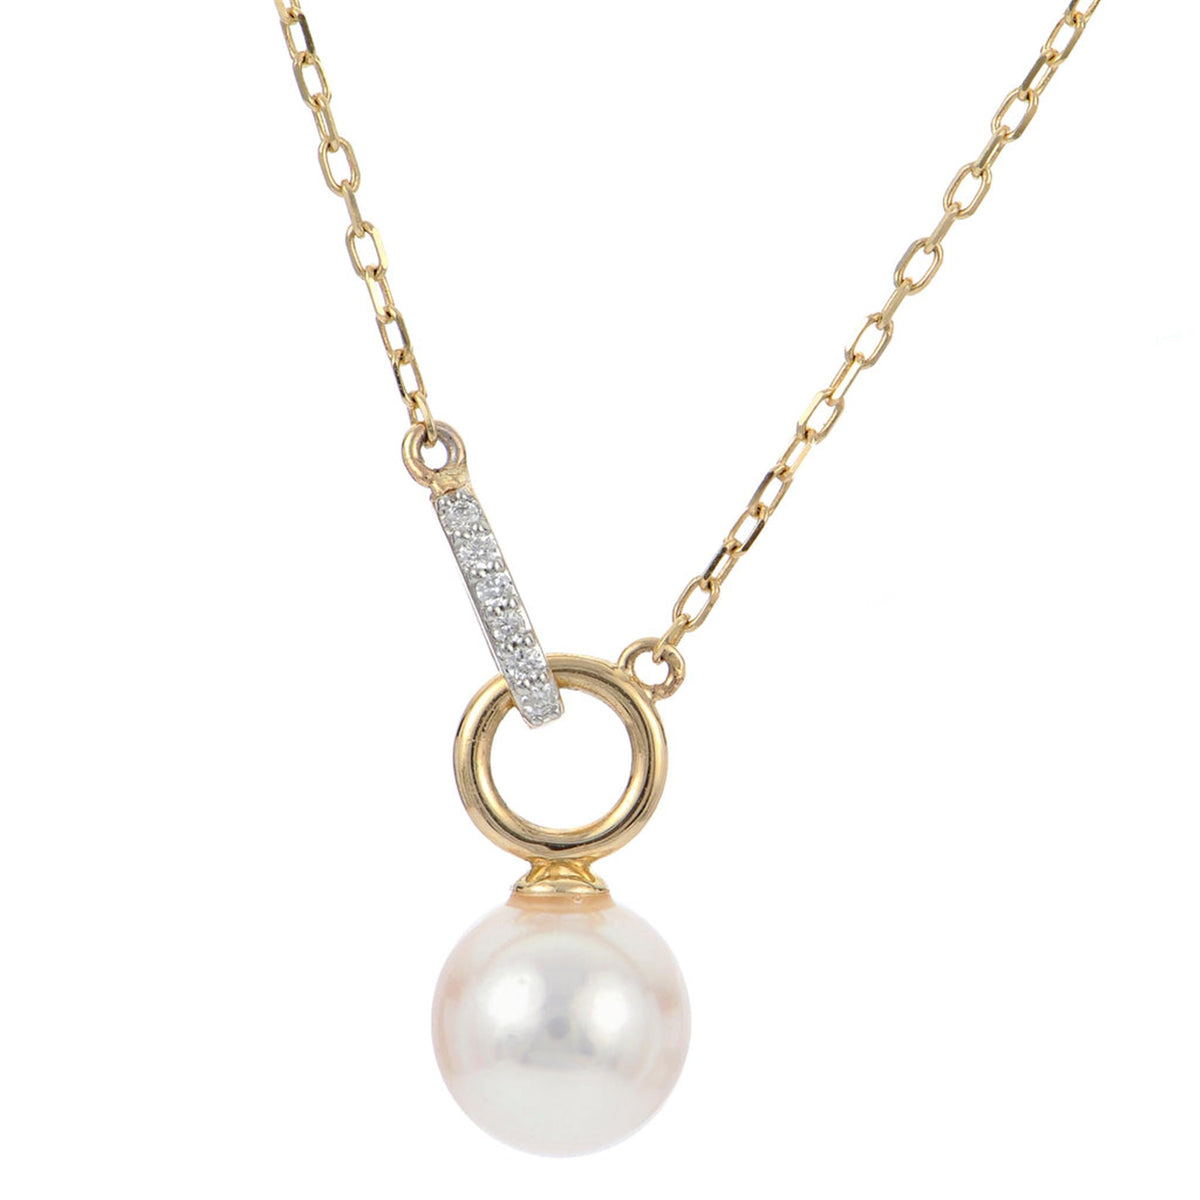 14Kt Yellow Gold Drop Pendant With 7.5mm Akoya Cultured Pearl